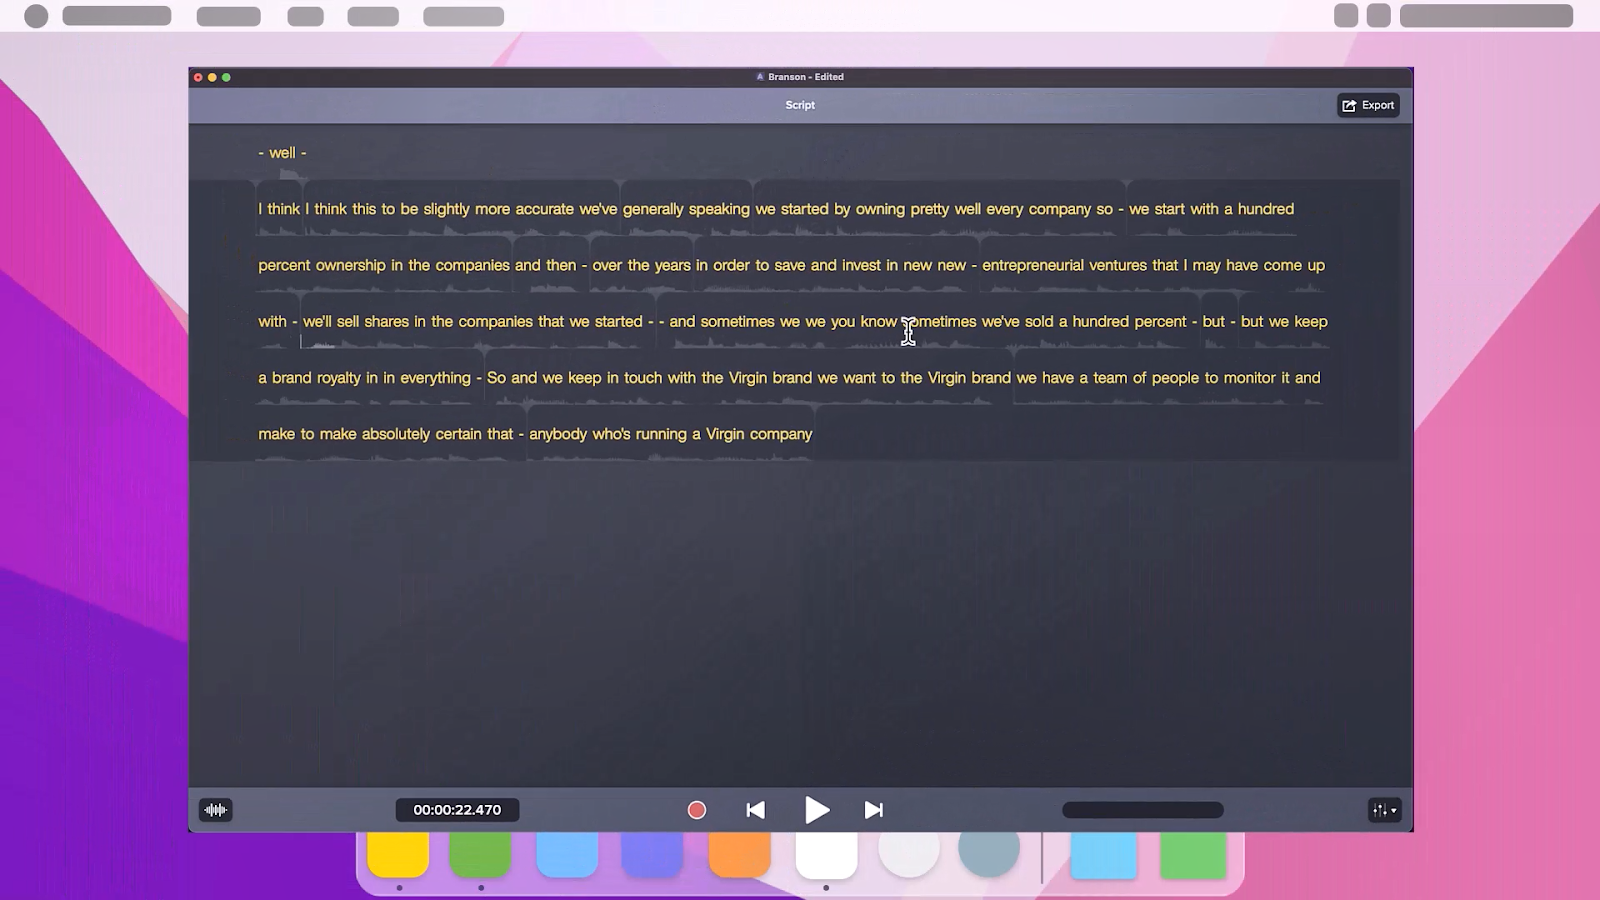 Audiate's text-based editing feature.